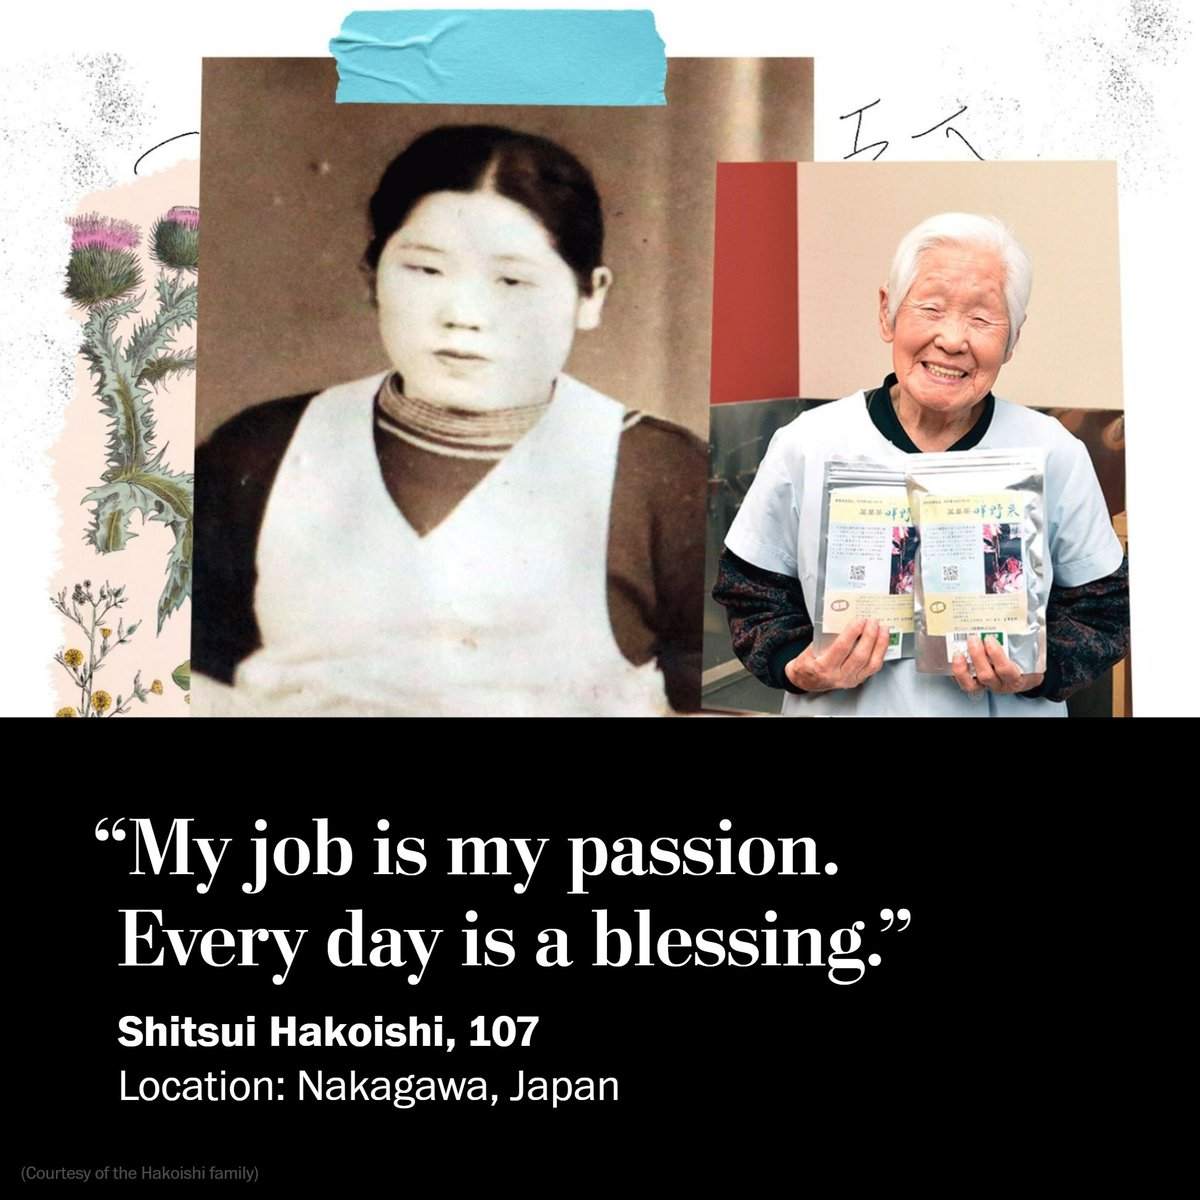 At 107, Shitsui Hakoishi is determined to claim a Guinness World Record. “The title for oldest barber in the world is currently 108 years old, so I need to work until I’m 109,” she said. The key to a long life, Hakoishi said, is a career that fills you with joy.…